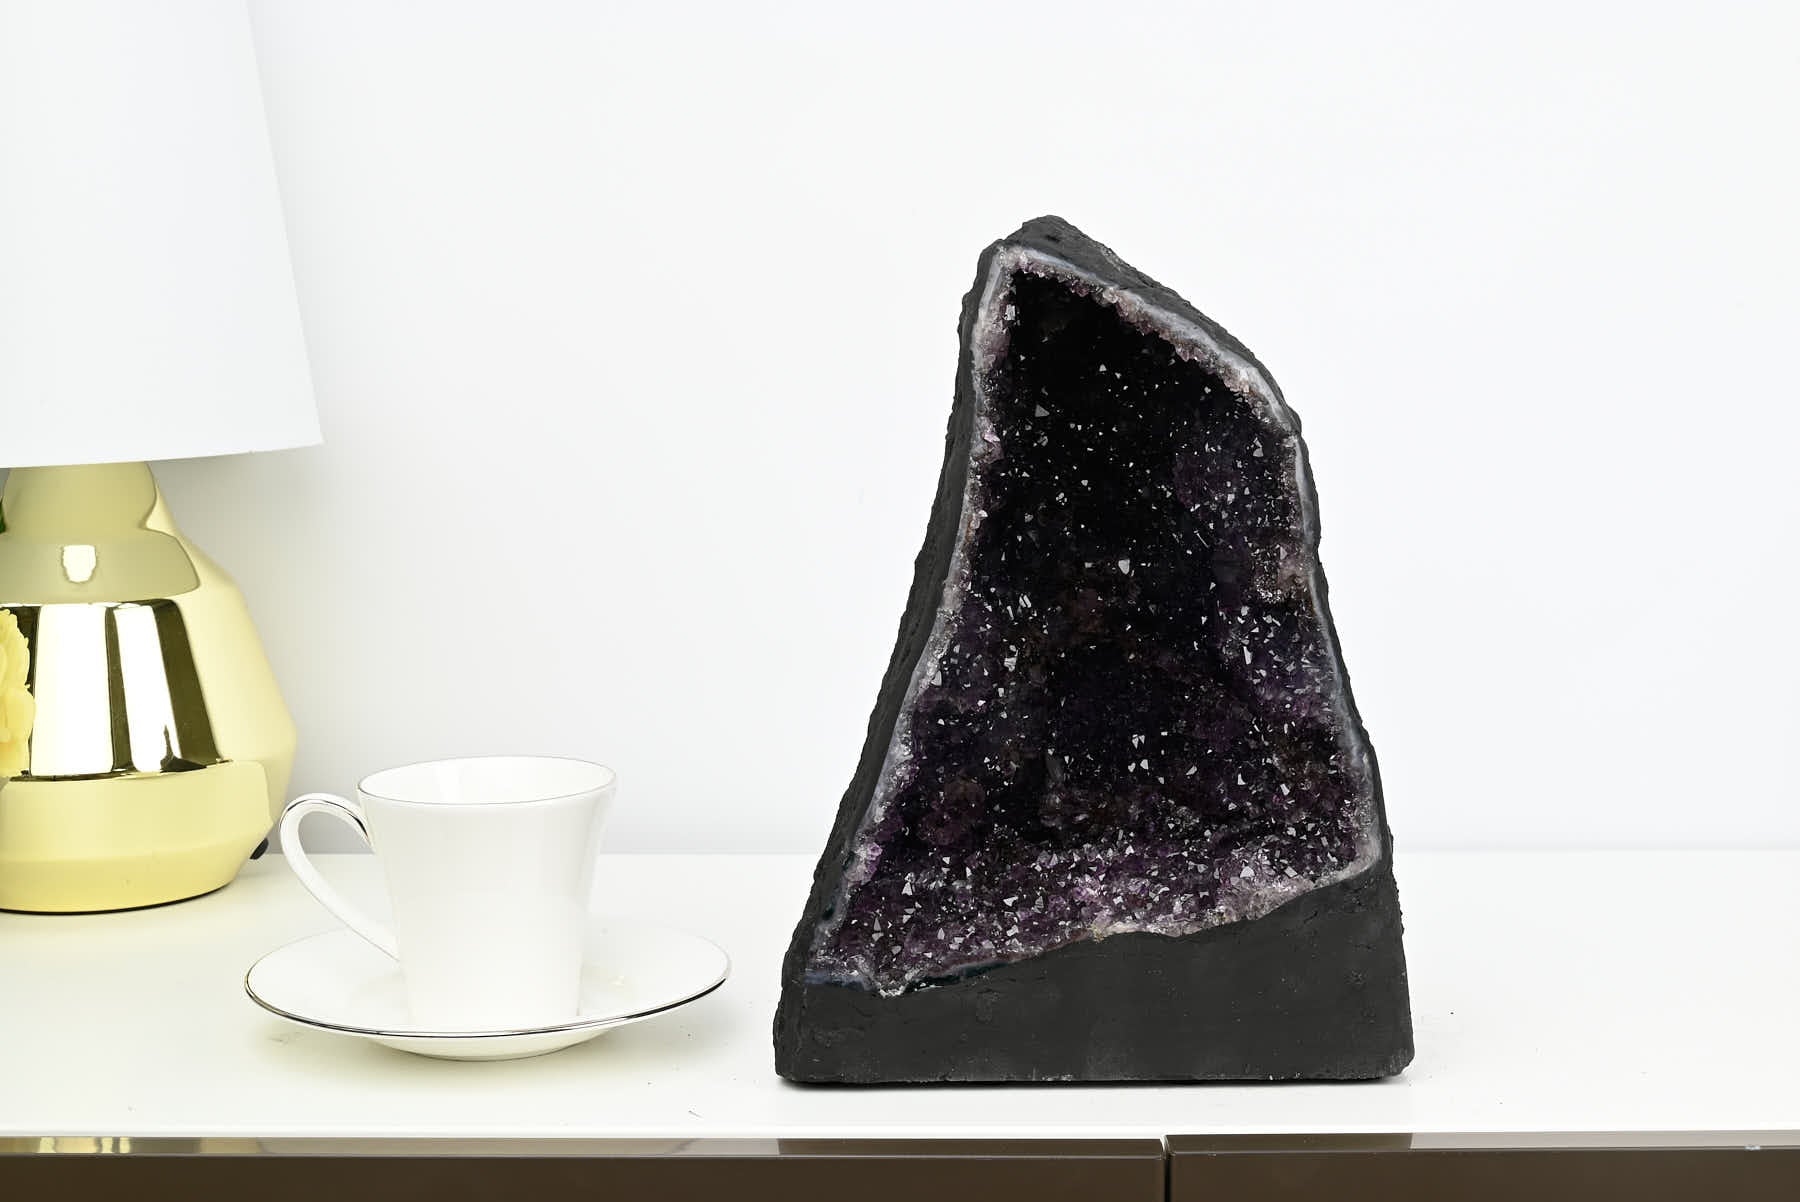 Extra Quality Amethyst Cathedral - 7.06kg, 27cm tall - #CAAMET-10062